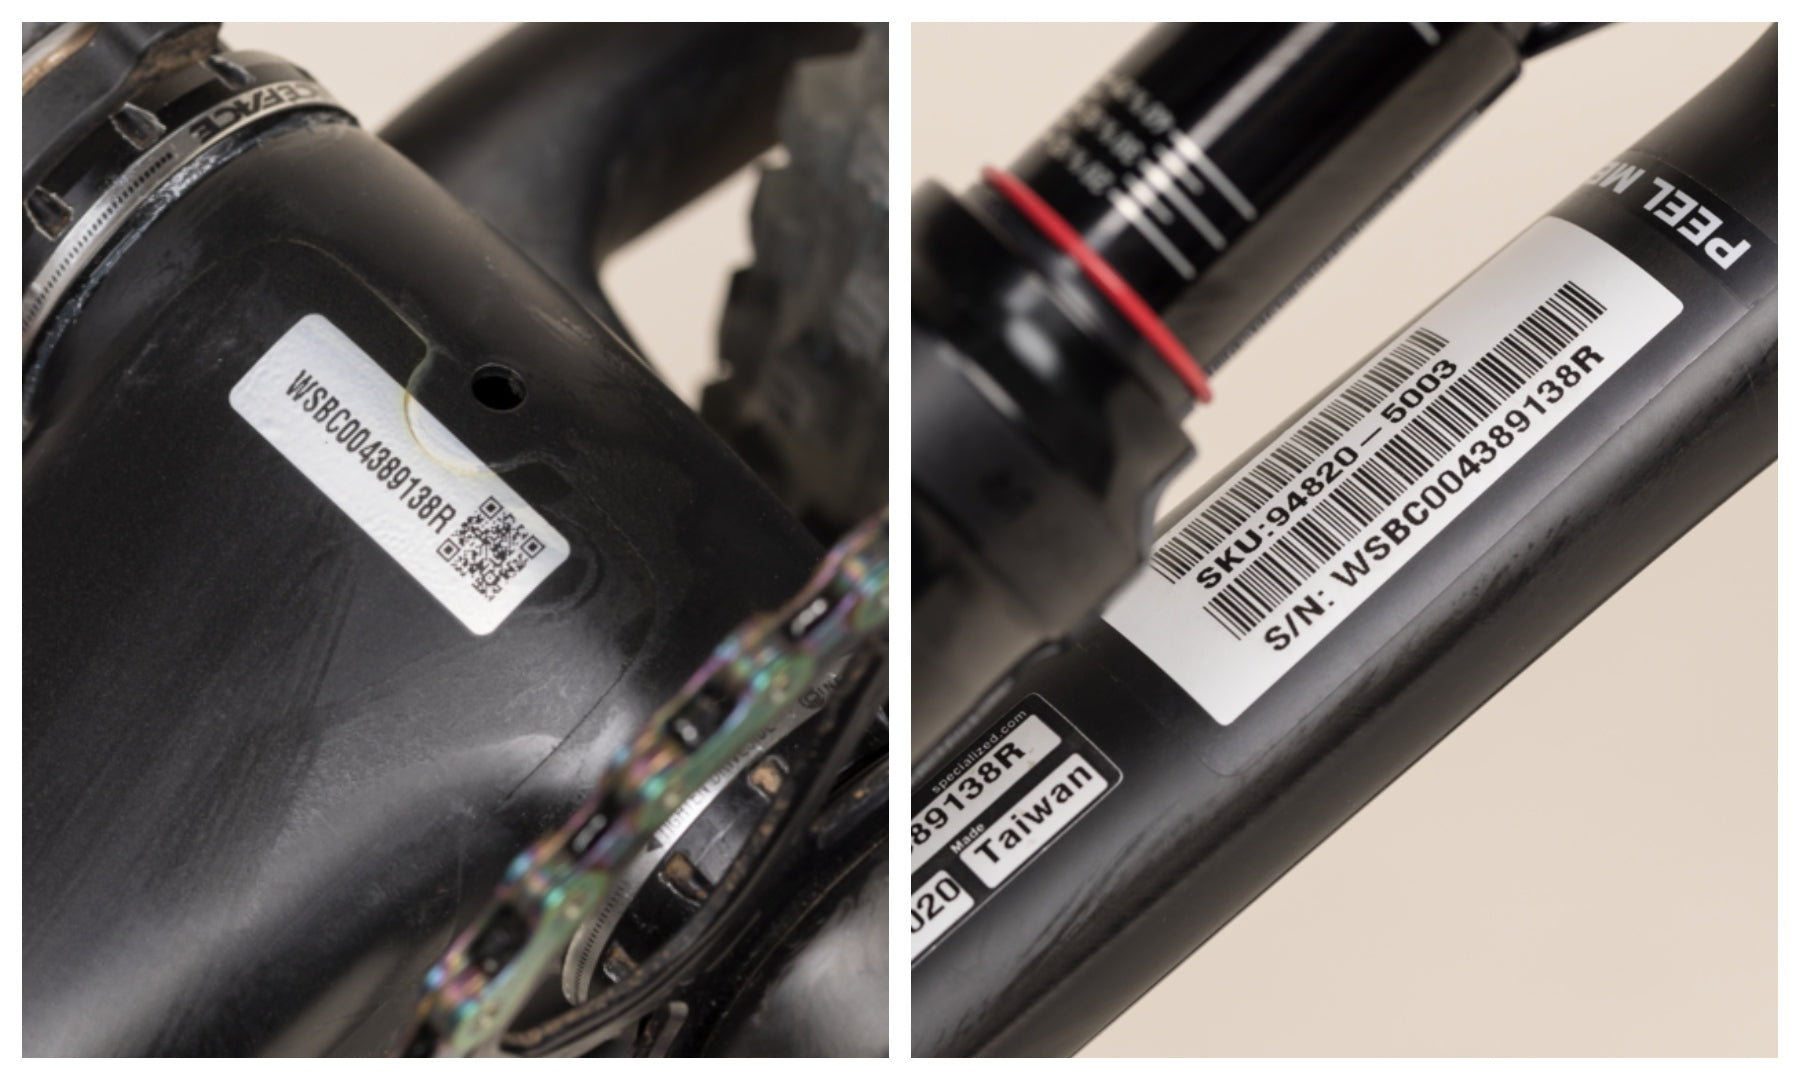 Find Your Bike's Serial Number (For Bike Index or to Sell Your Bike)